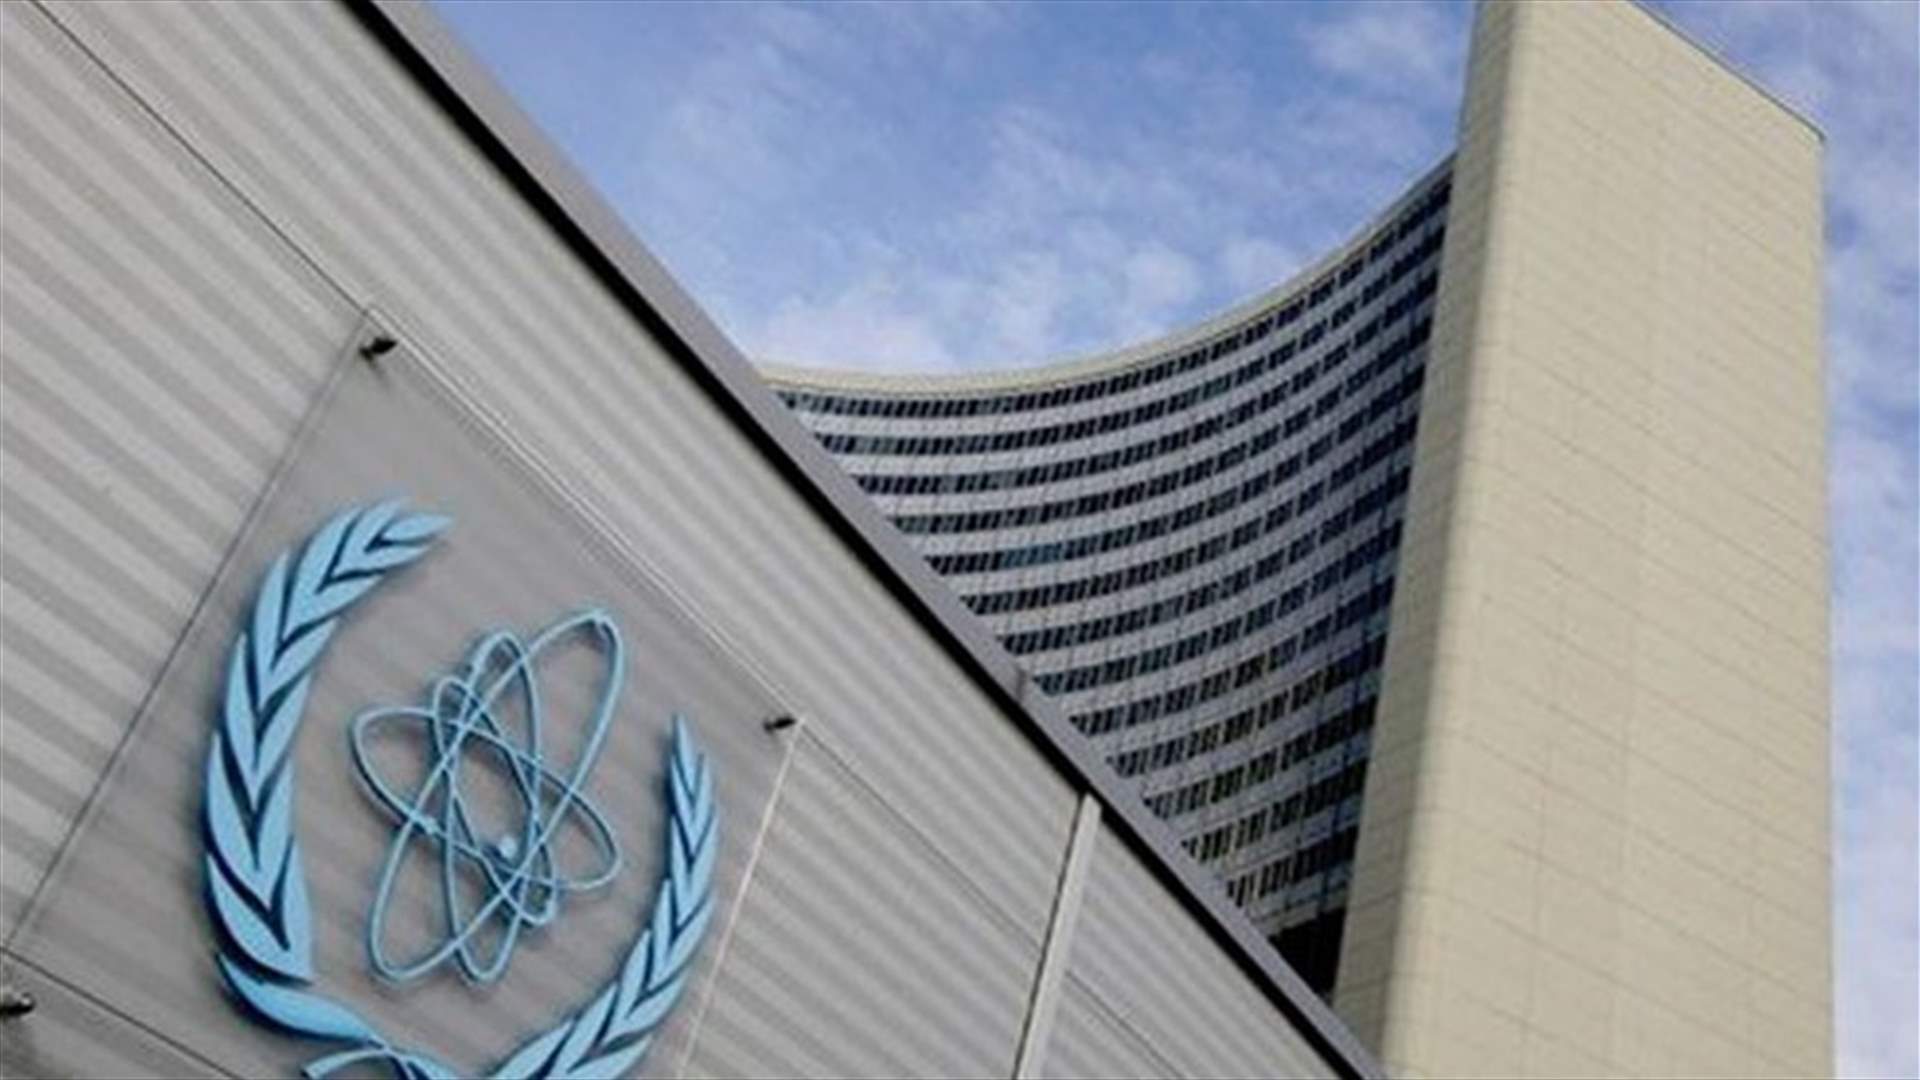 UN nuclear chief says confident of US cooperation on Iran deal